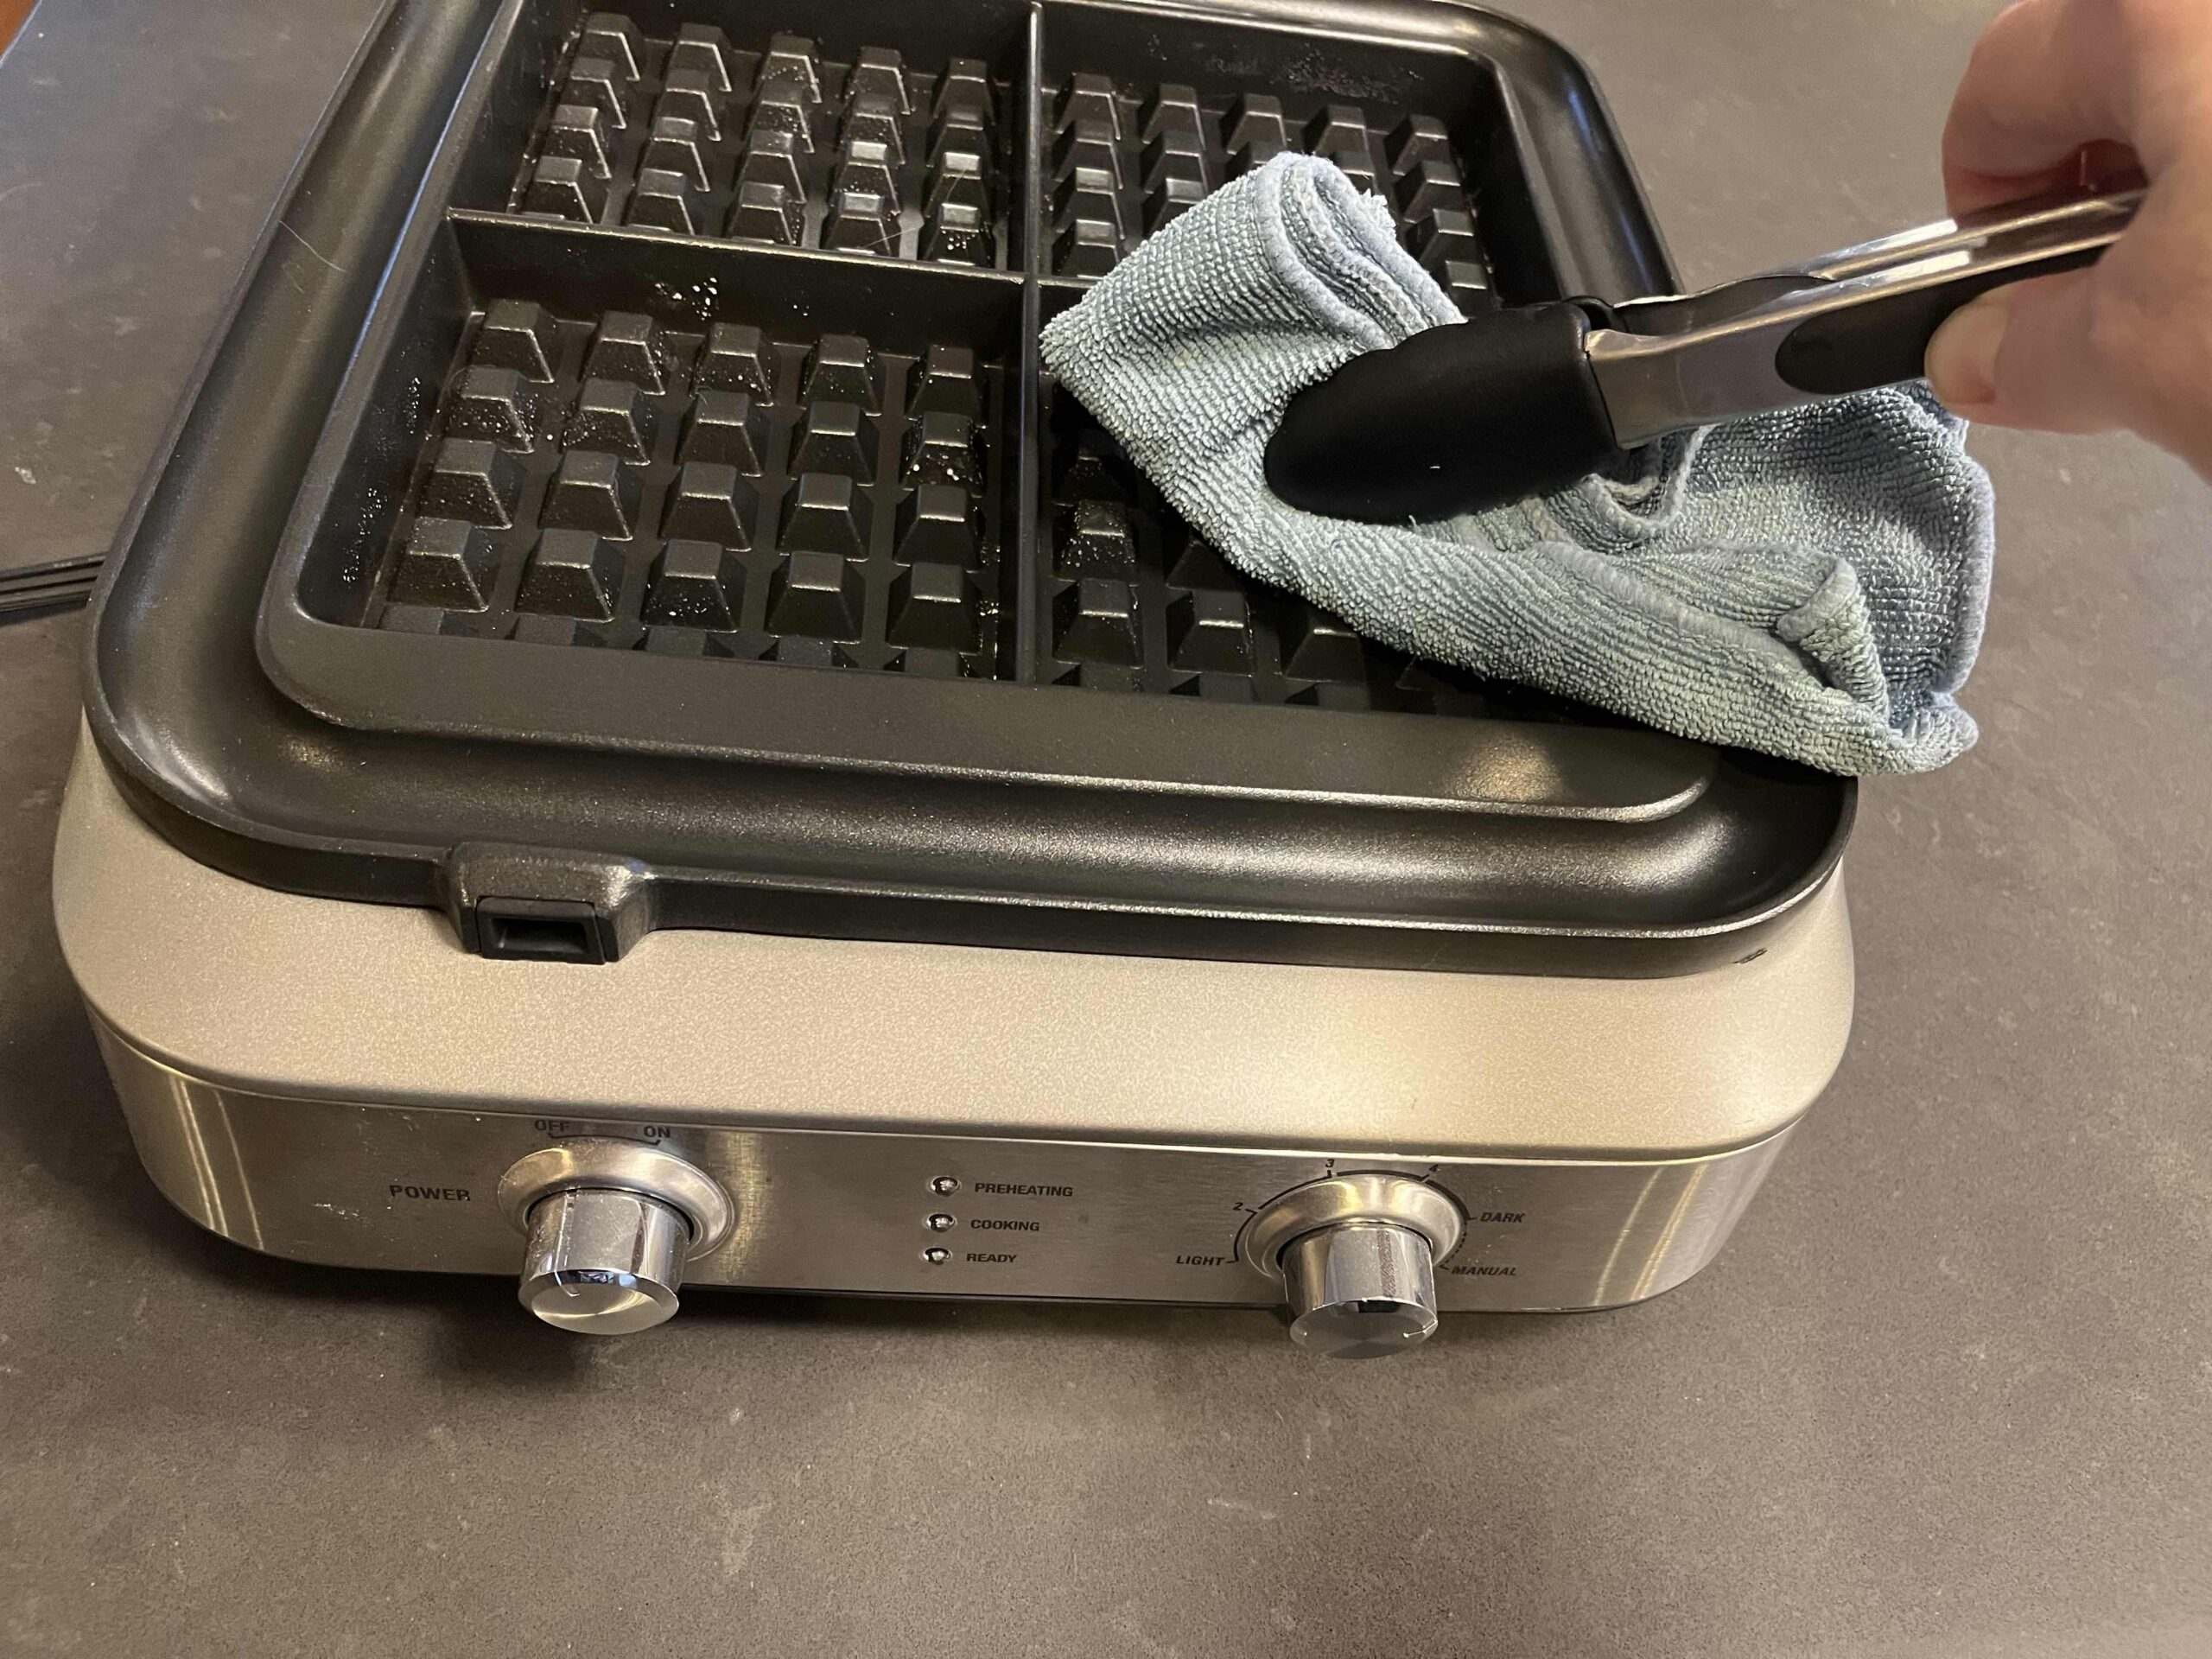 Cleaning Waffle Iron Plates with Cloth and Tongs